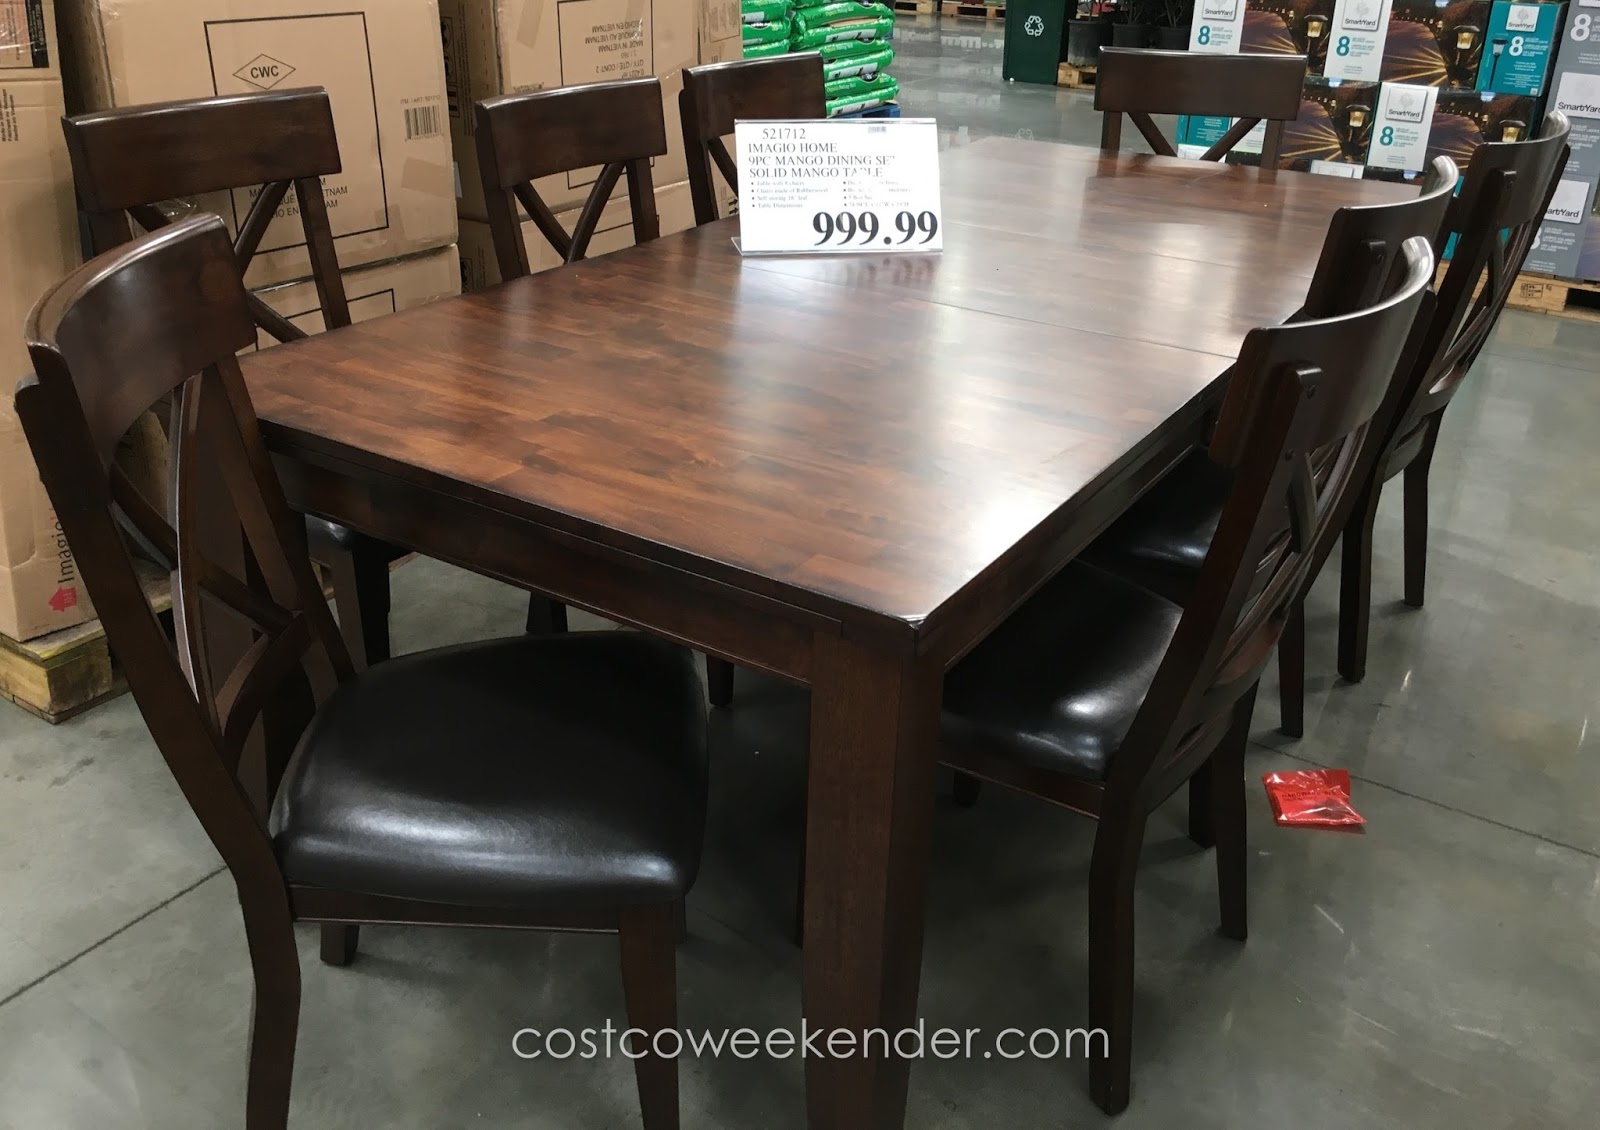 Imagio Home 9 Piece Solid Wood Dining Set Costco Weekender